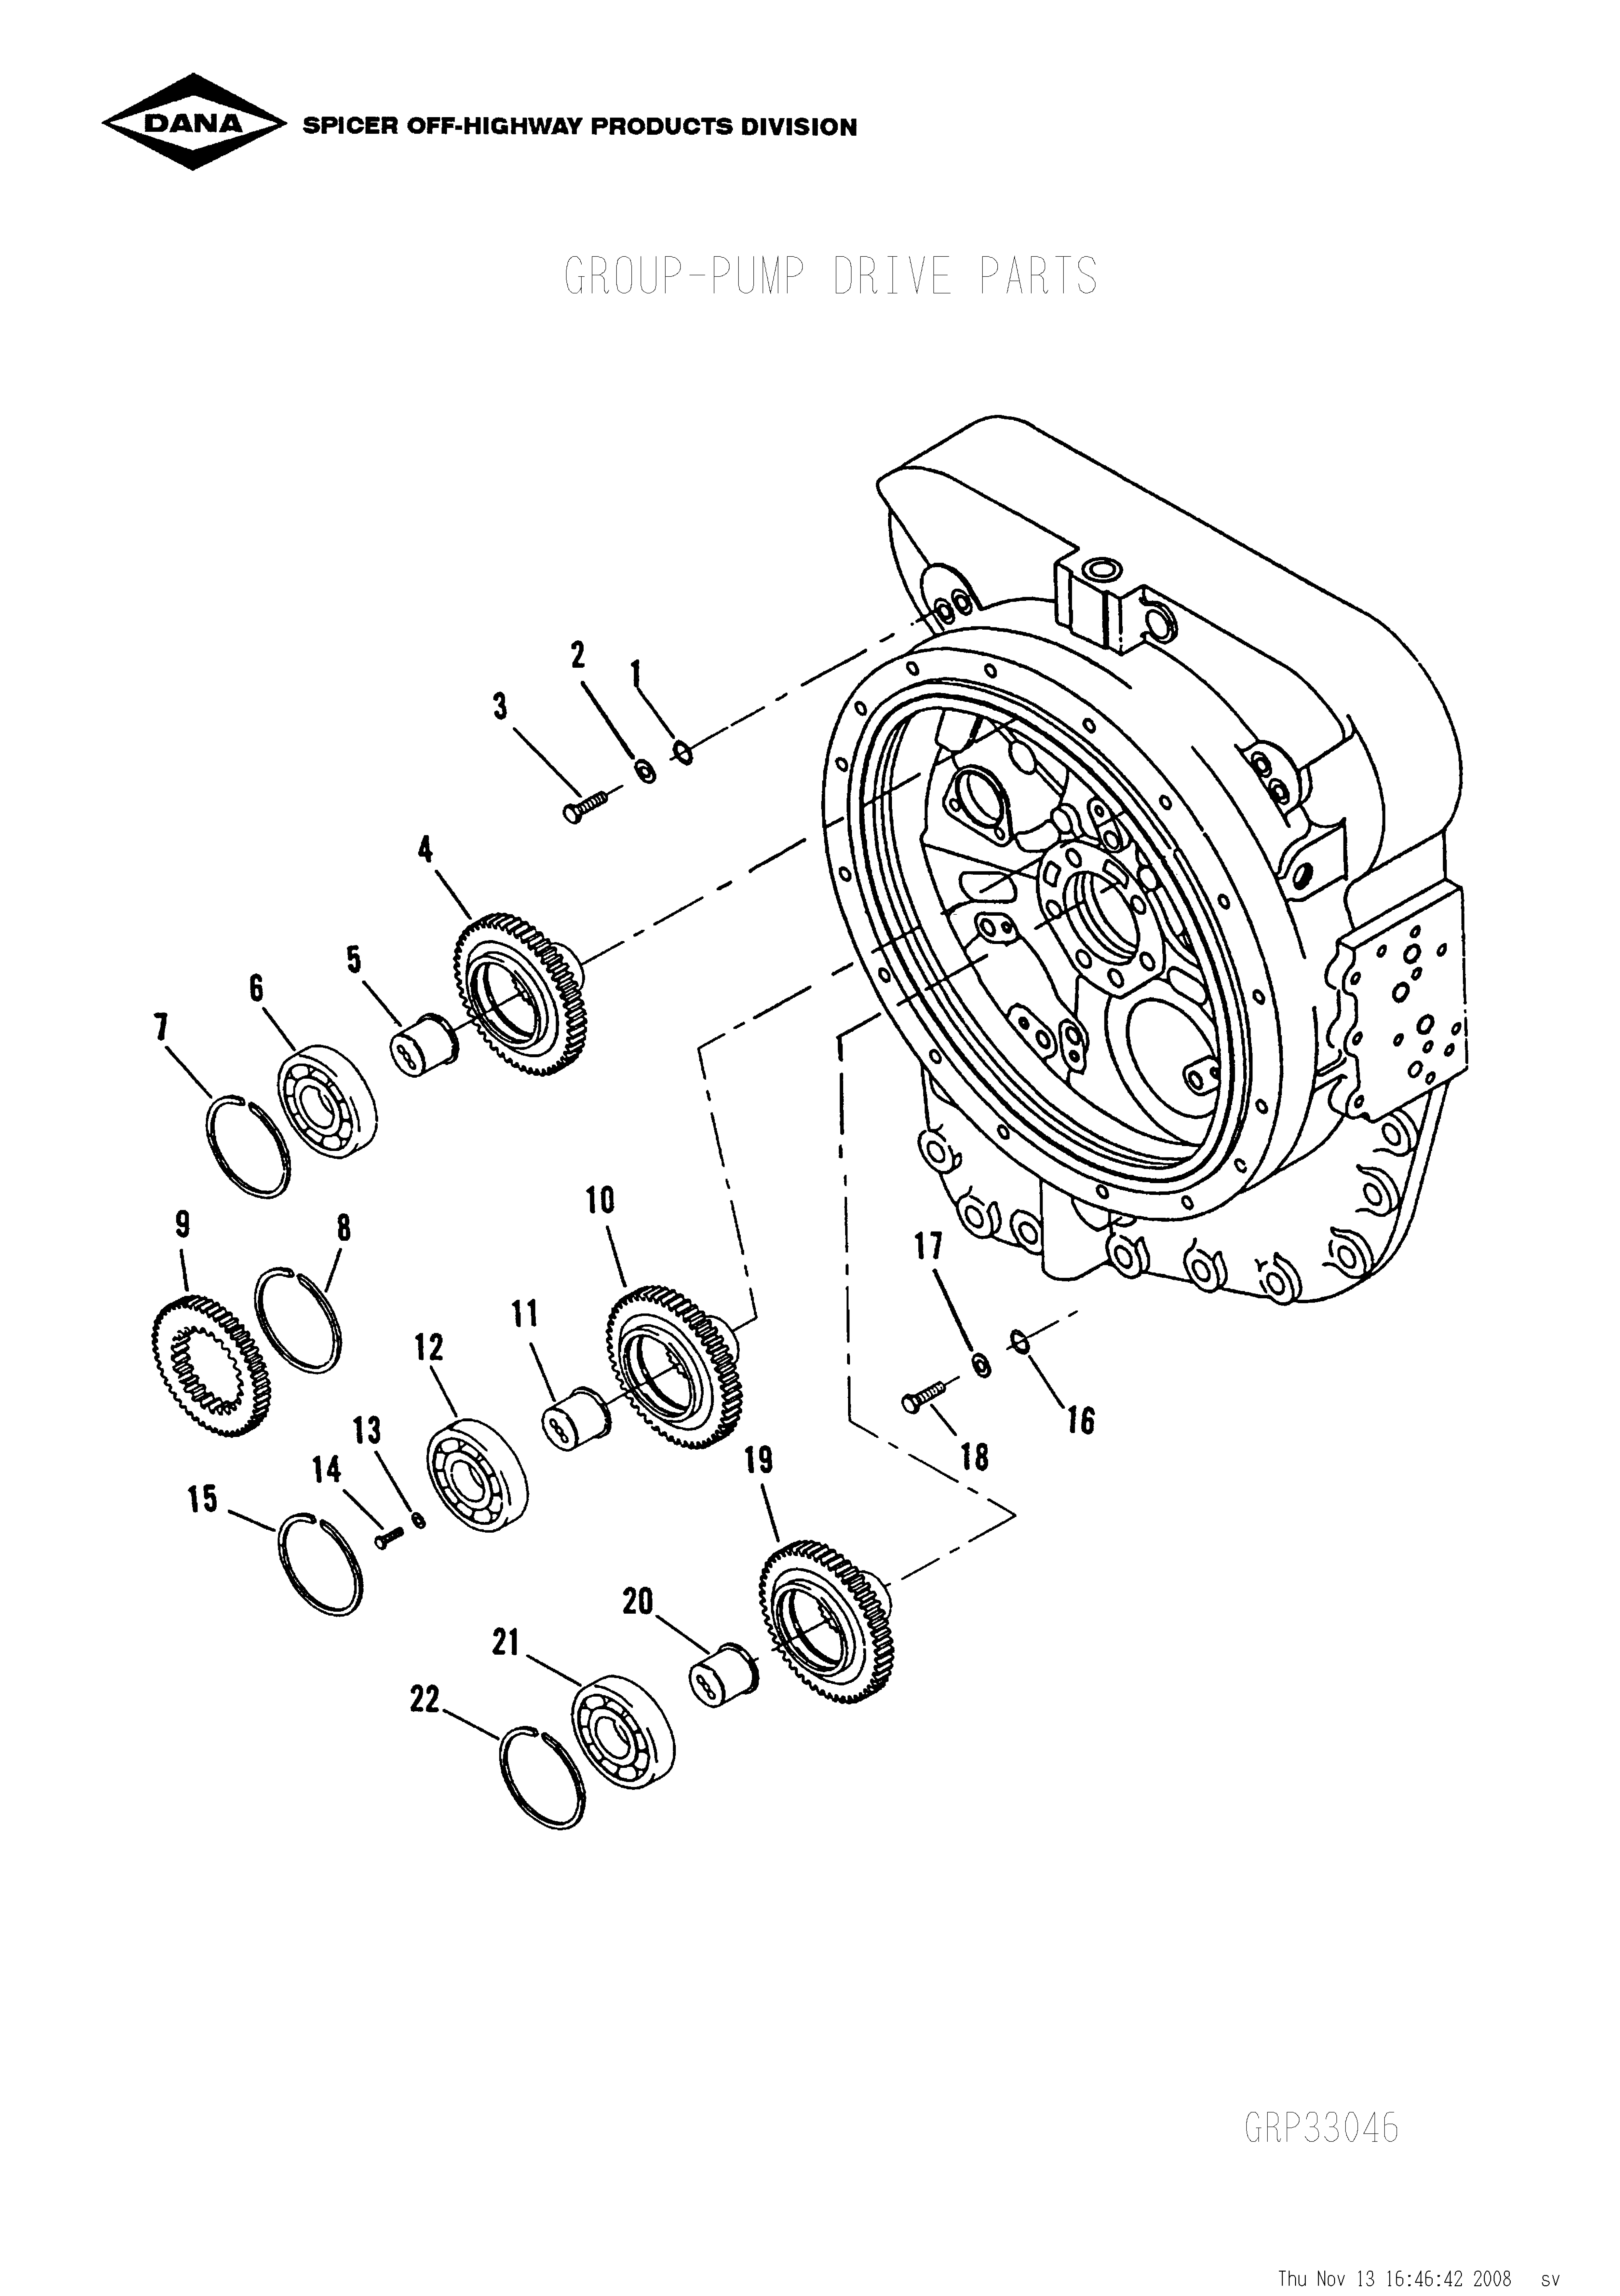 drawing for NACCO GROUP 0330533 - GEAR (figure 1)